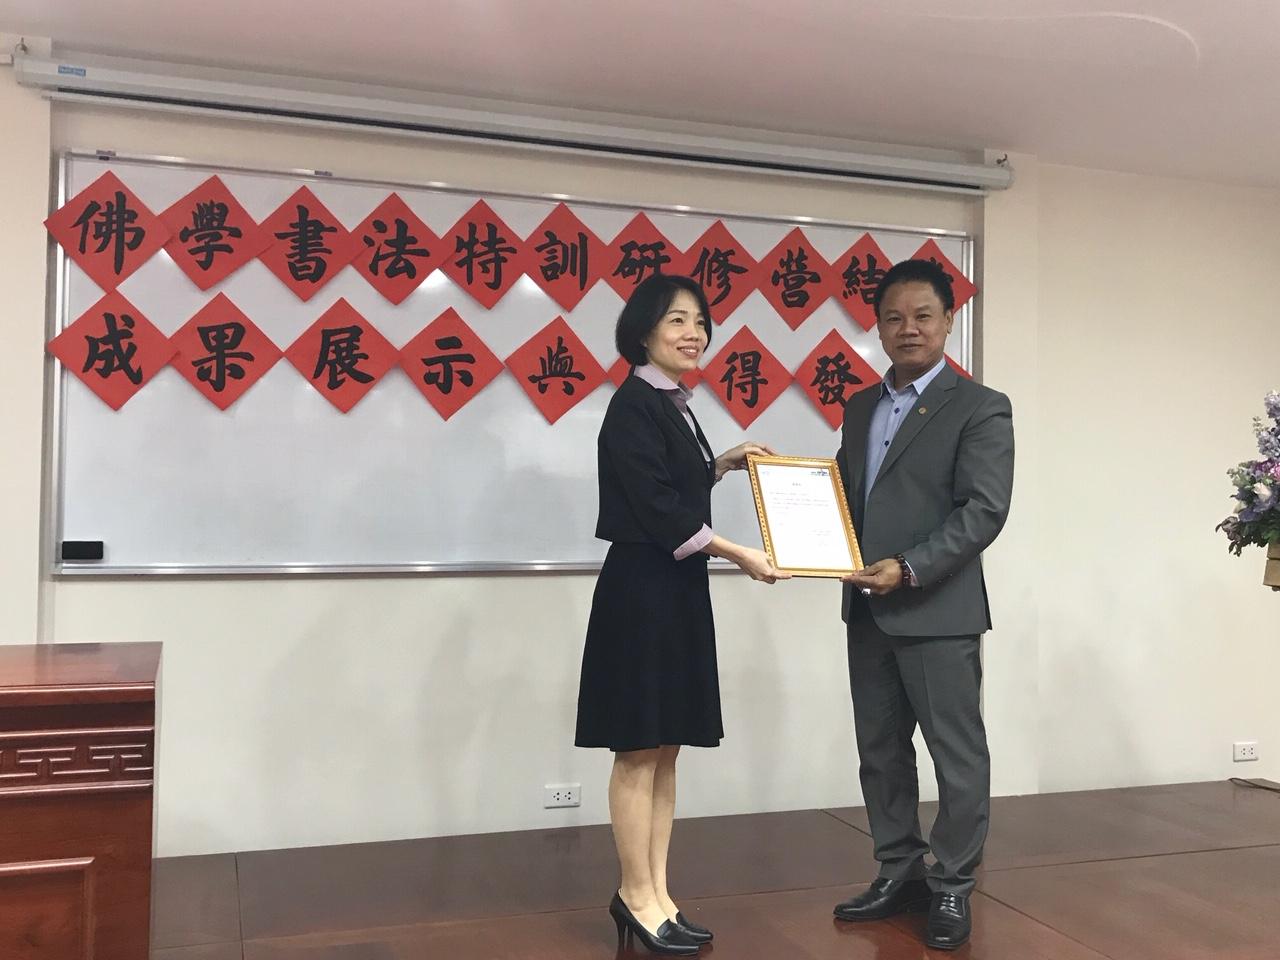 2.	Dr. Lai Quoc Khanh, Vice president of Tran Nhan Tong Academy, presents the certificate of appreciation to Taipei Economic and Cultural Office in Vietnam